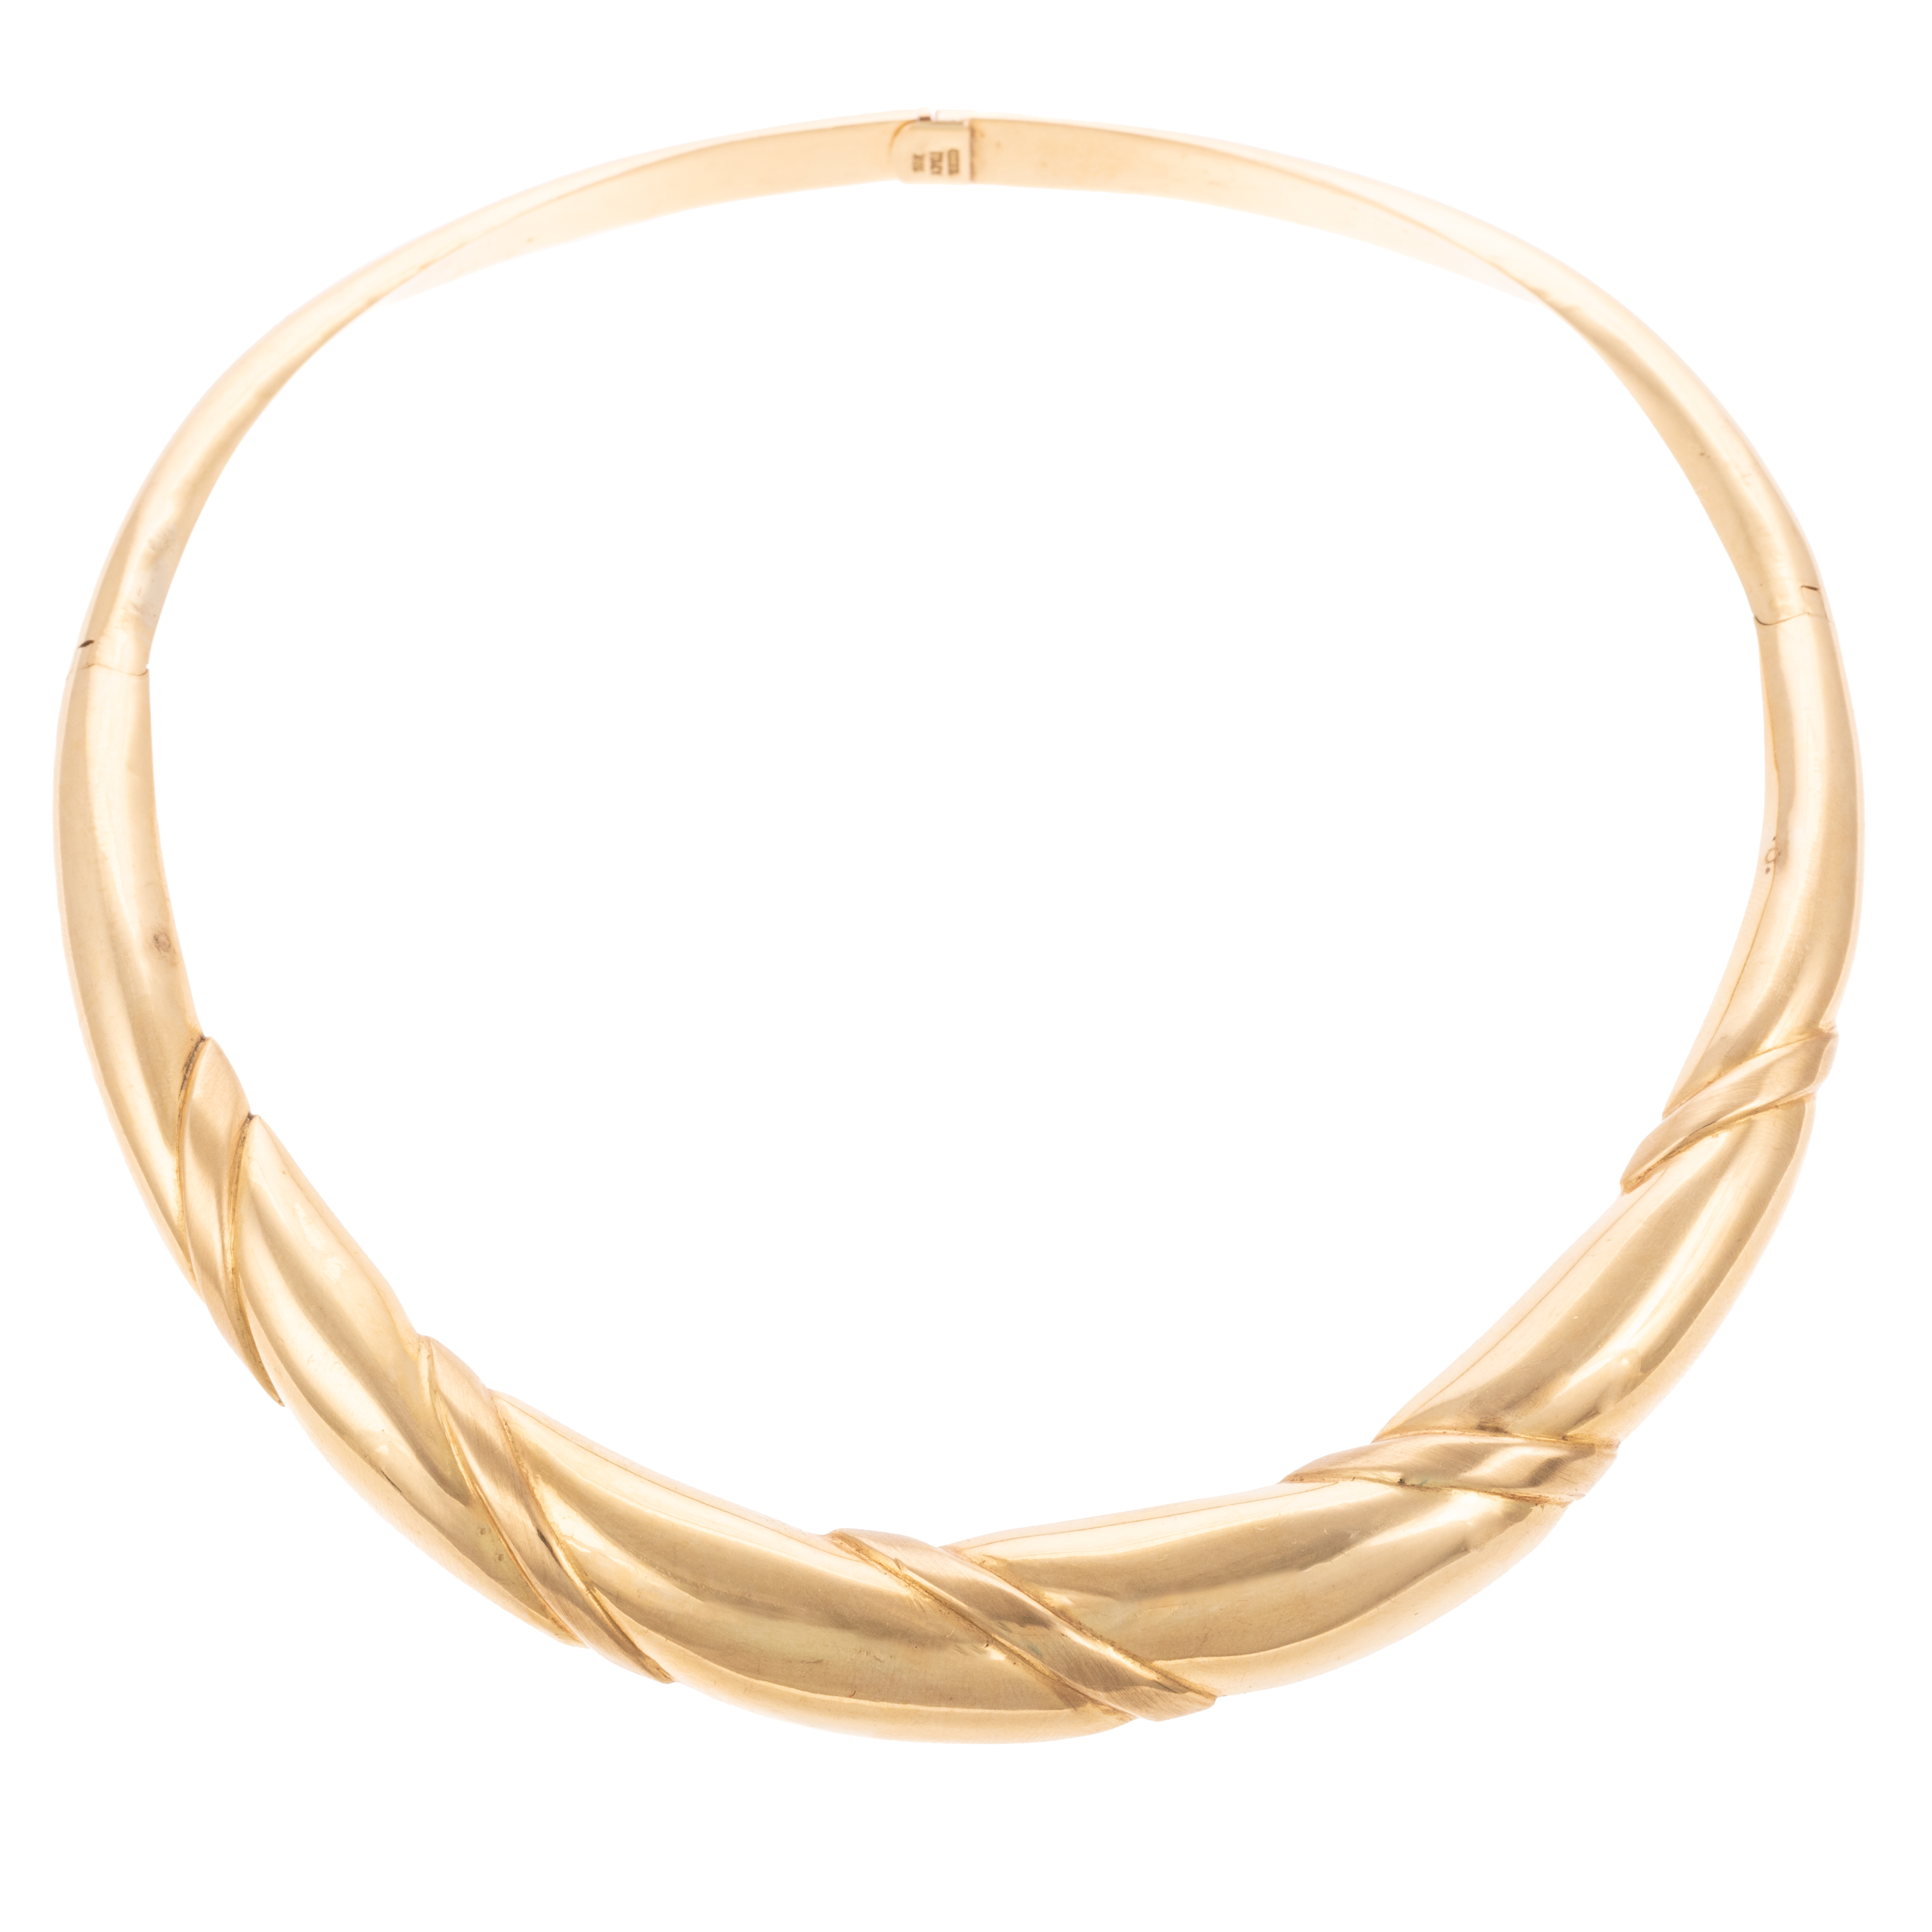 A HINGED COLLAR BY CITRA IN 18K